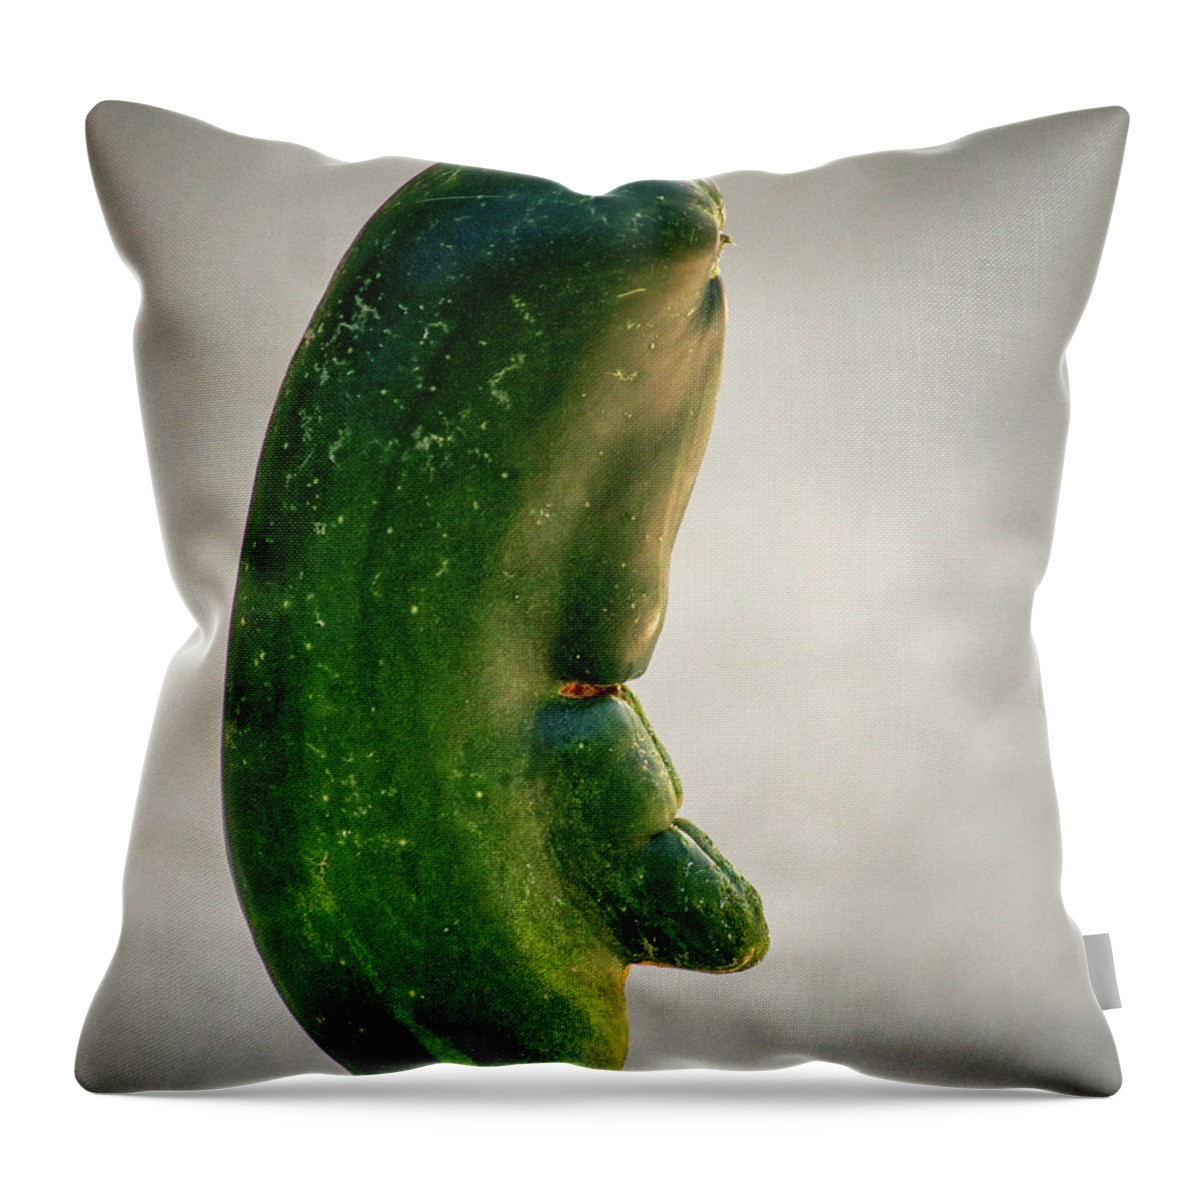 Jimmy Durante Throw Pillow featuring the photograph Jimmy Durante Cucumber by Bill Swartwout